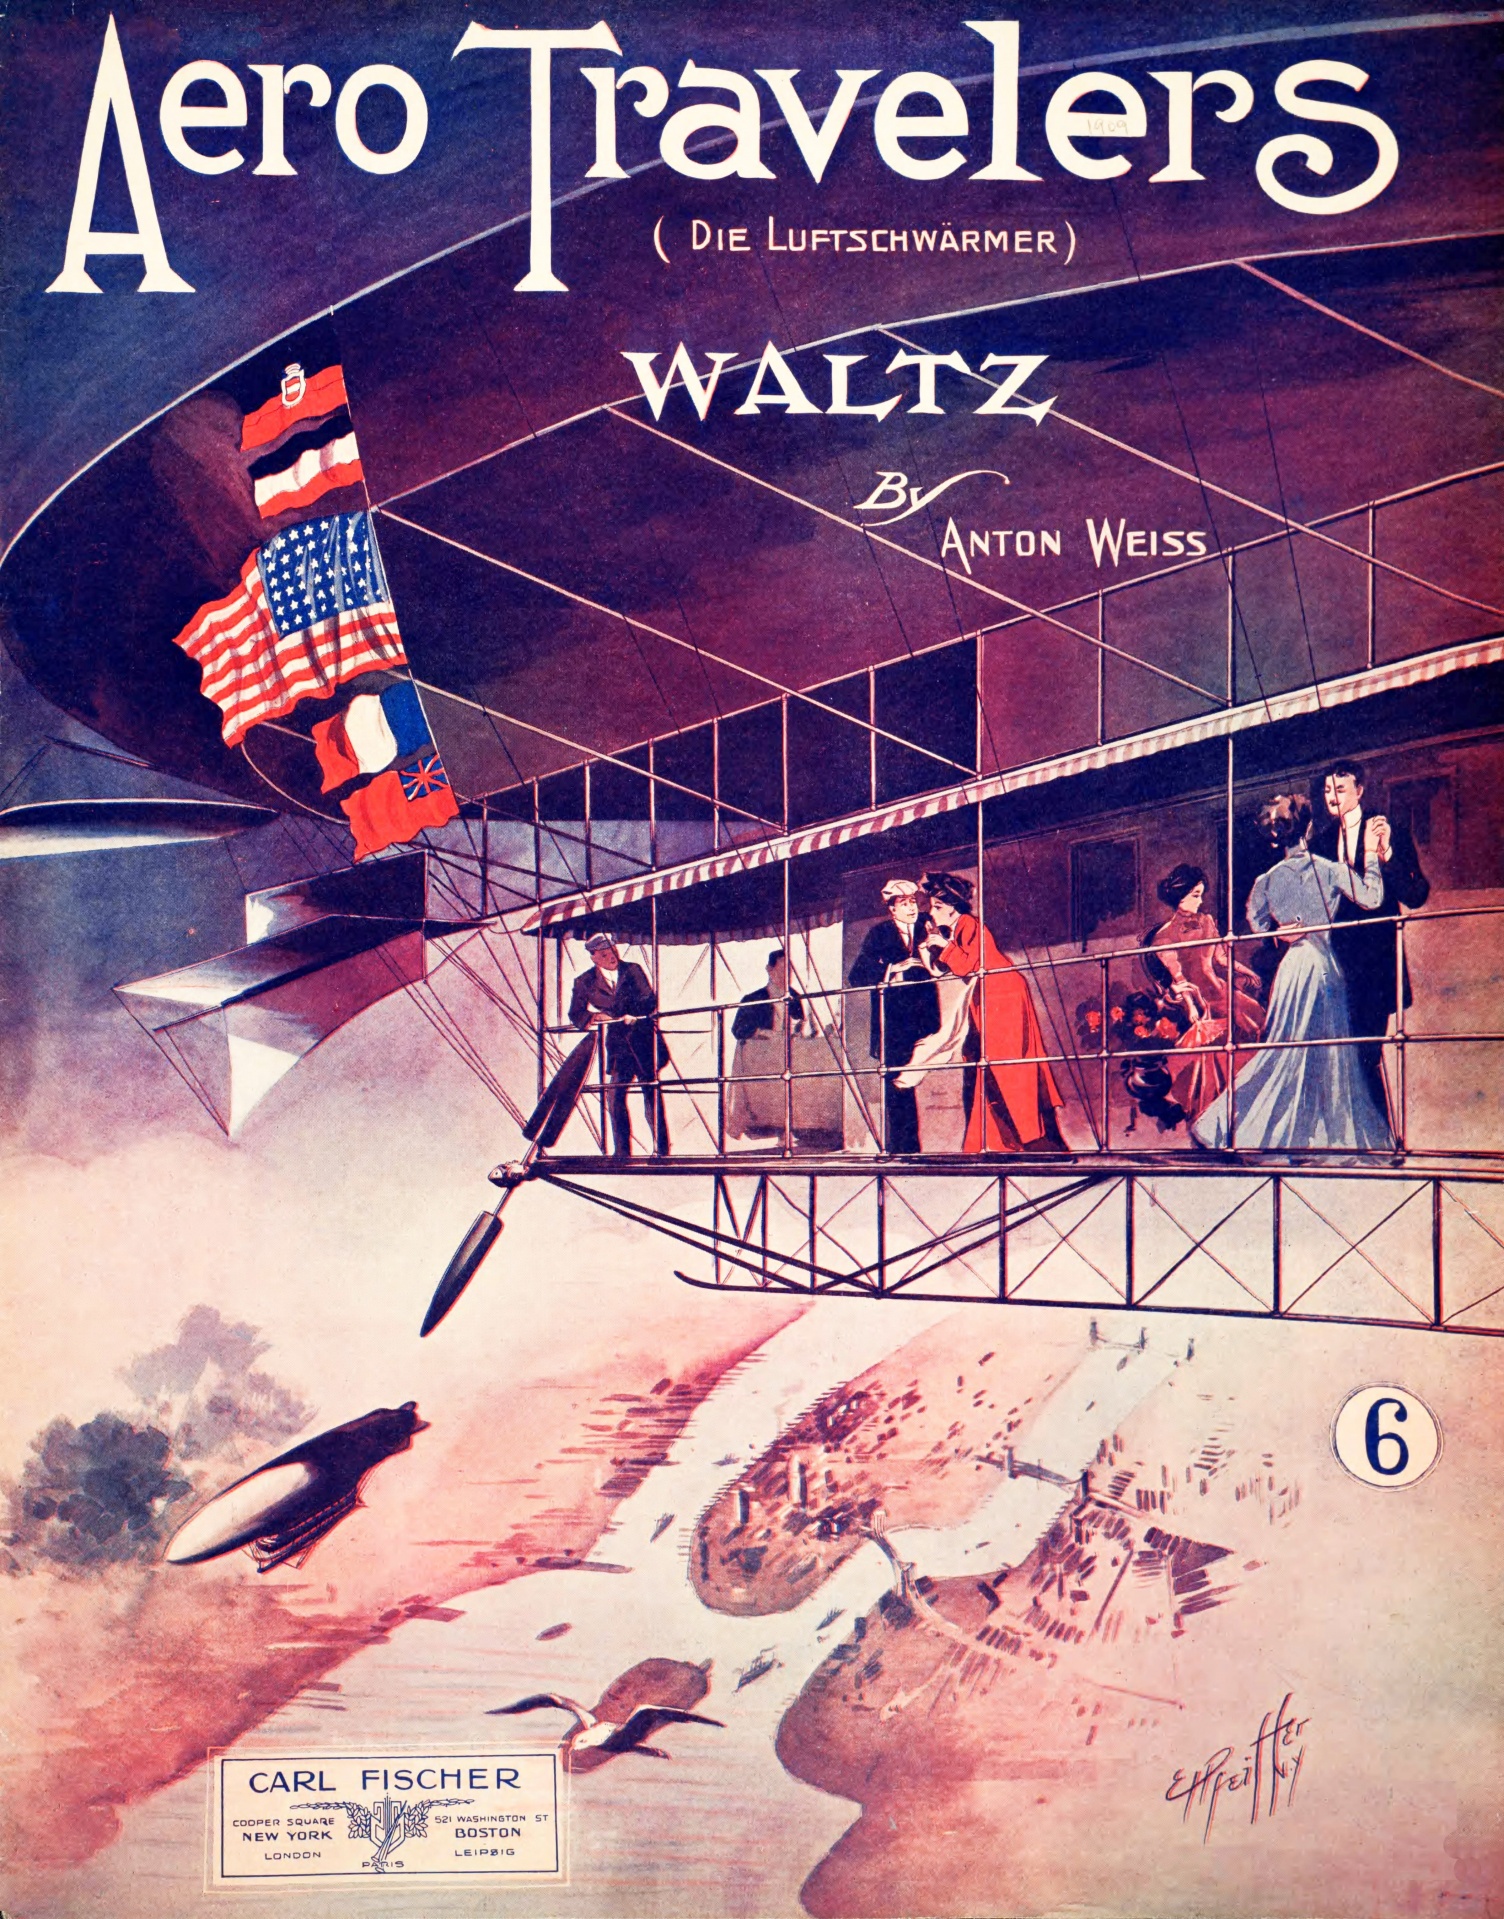 1909 Aero Travelers Waltz cover shows passengers sightseeing and dancing in the gondola of an airship over Manhattan. Several flags fly from the airship including the U.S. flag.